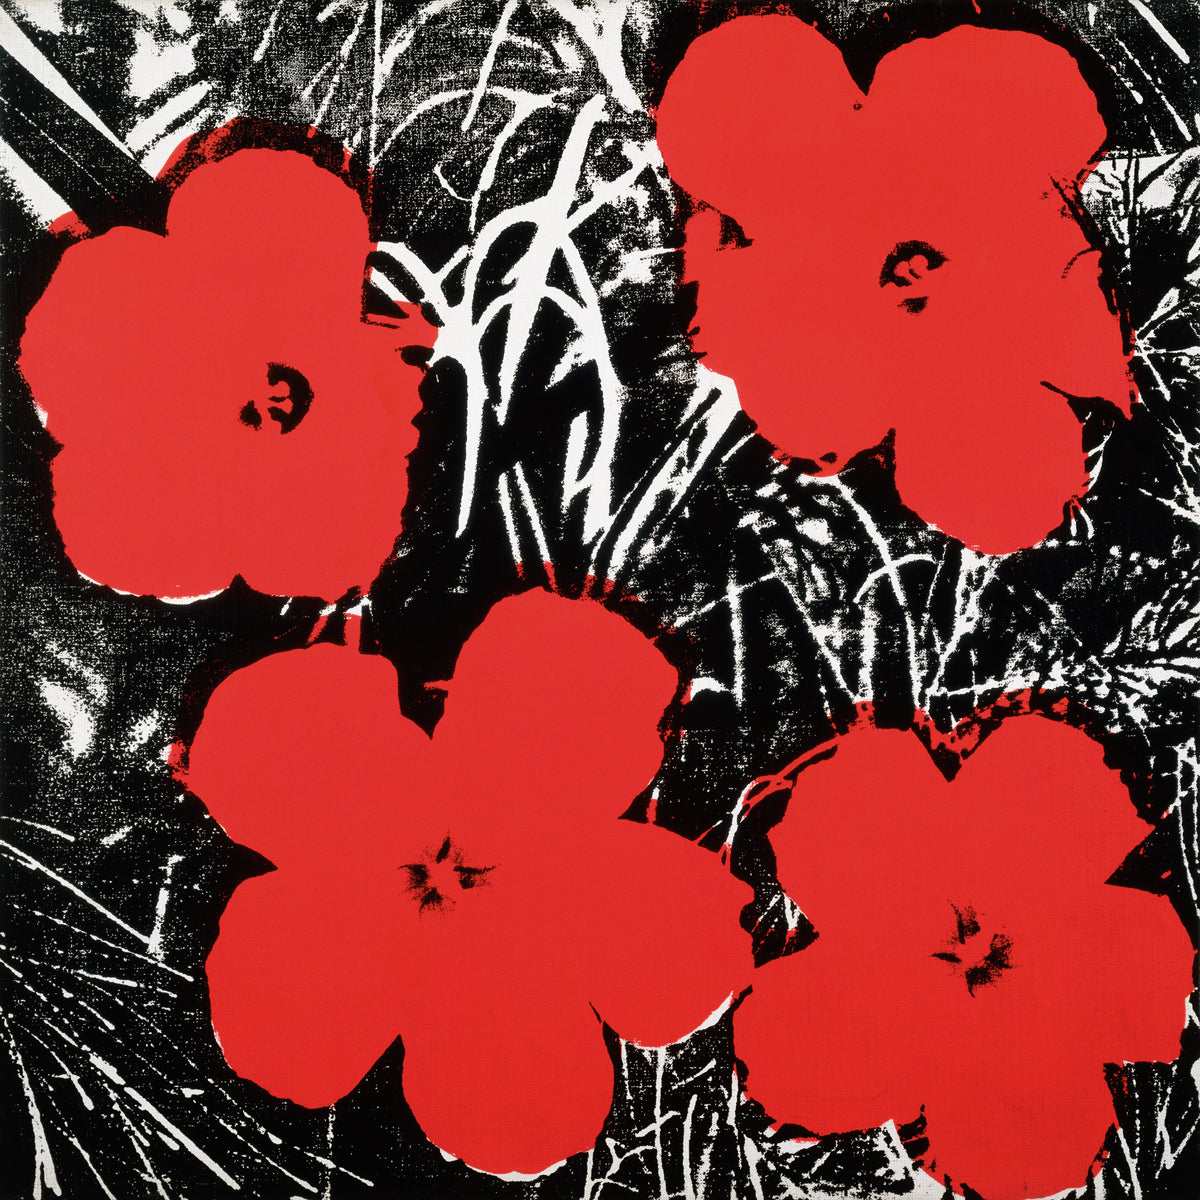 Andy Warhol - Flowers (Red), 1964